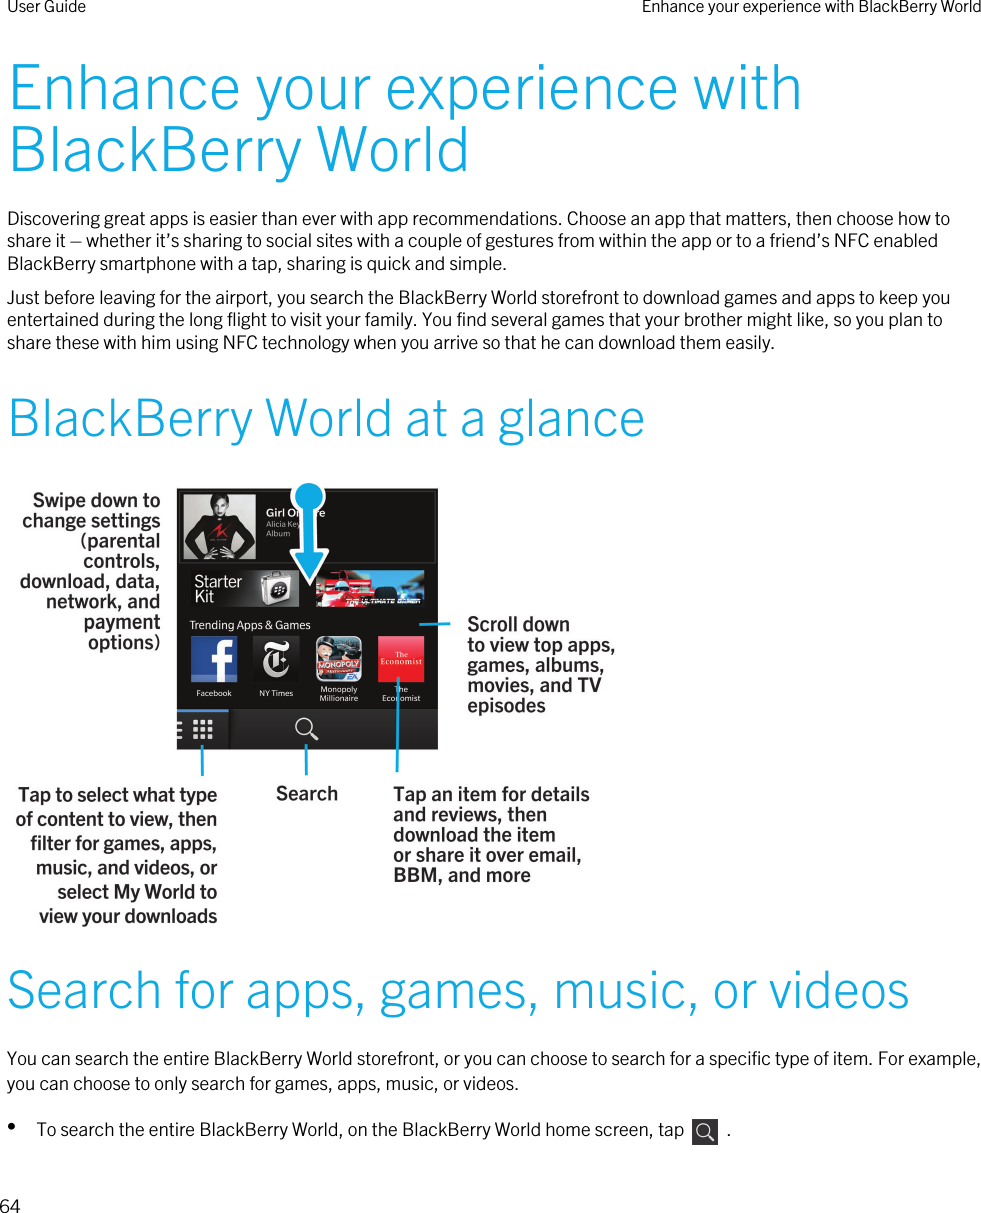 Enhance your experience with BlackBerry WorldDiscovering great apps is easier than ever with app recommendations. Choose an app that matters, then choose how to share it – whether it’s sharing to social sites with a couple of gestures from within the app or to a friend’s NFC enabled BlackBerry smartphone with a tap, sharing is quick and simple.Just before leaving for the airport, you search the BlackBerry World storefront to download games and apps to keep you entertained during the long flight to visit your family. You find several games that your brother might like, so you plan to share these with him using NFC technology when you arrive so that he can download them easily.BlackBerry World at a glance Search for apps, games, music, or videosYou can search the entire BlackBerry World storefront, or you can choose to search for a specific type of item. For example, you can choose to only search for games, apps, music, or videos.•To search the entire BlackBerry World, on the BlackBerry World home screen, tap    .User Guide Enhance your experience with BlackBerry World64 